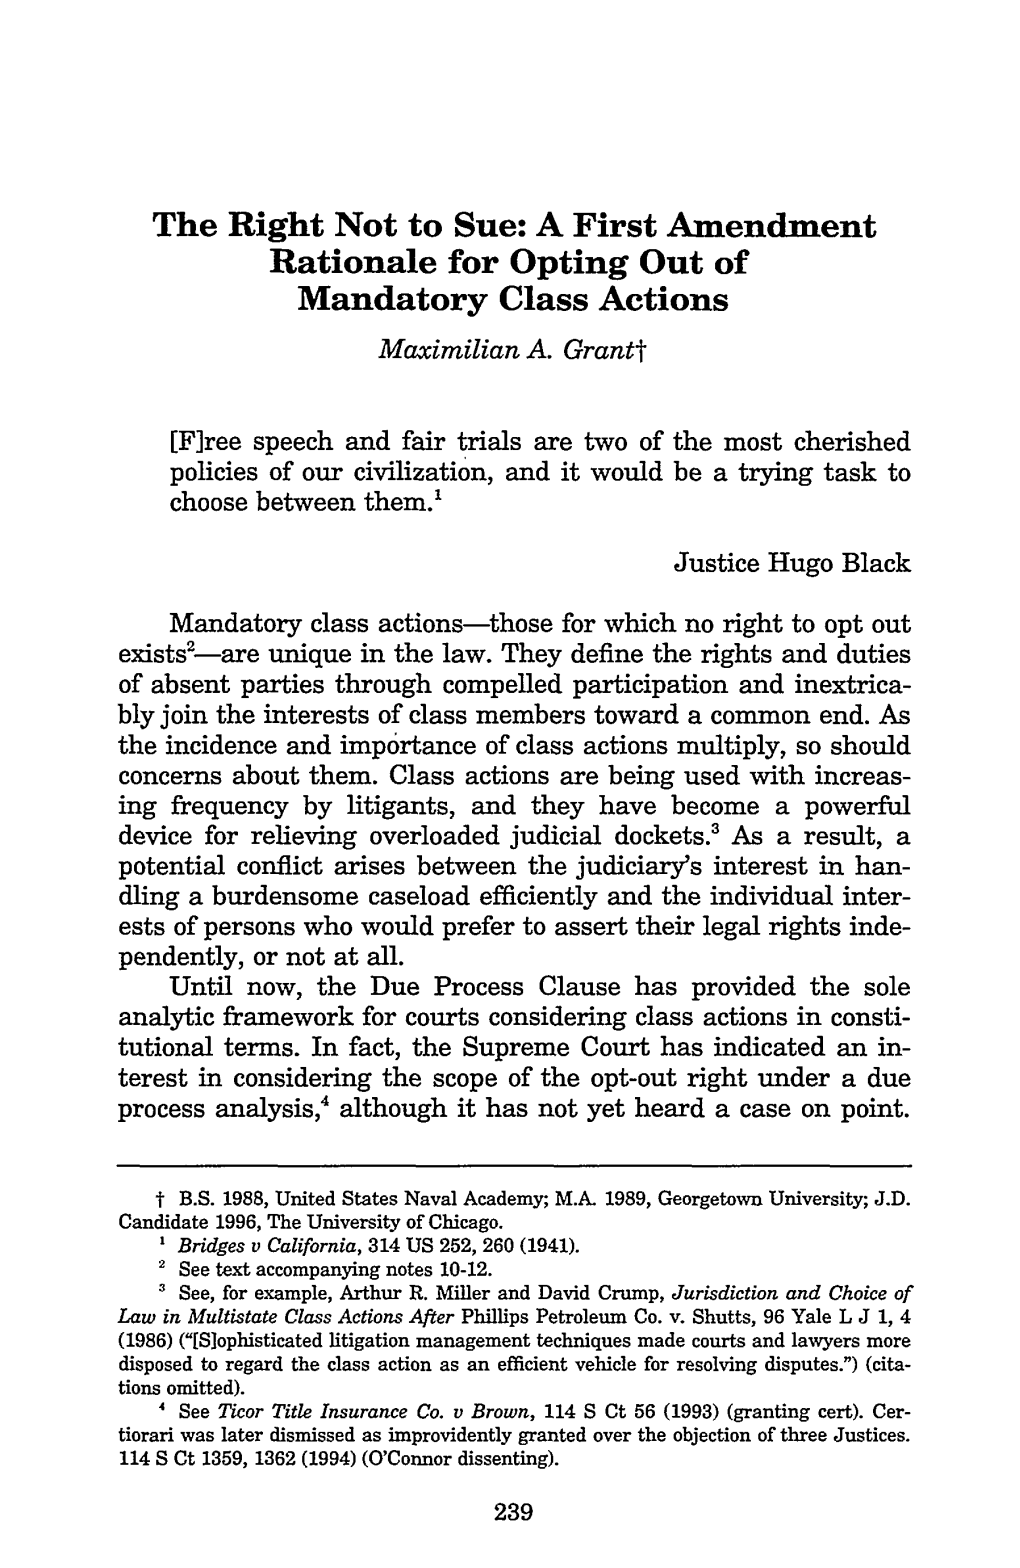 A First Amendment Rationale for Opting out of Mandatory Class Actions Maximiliana